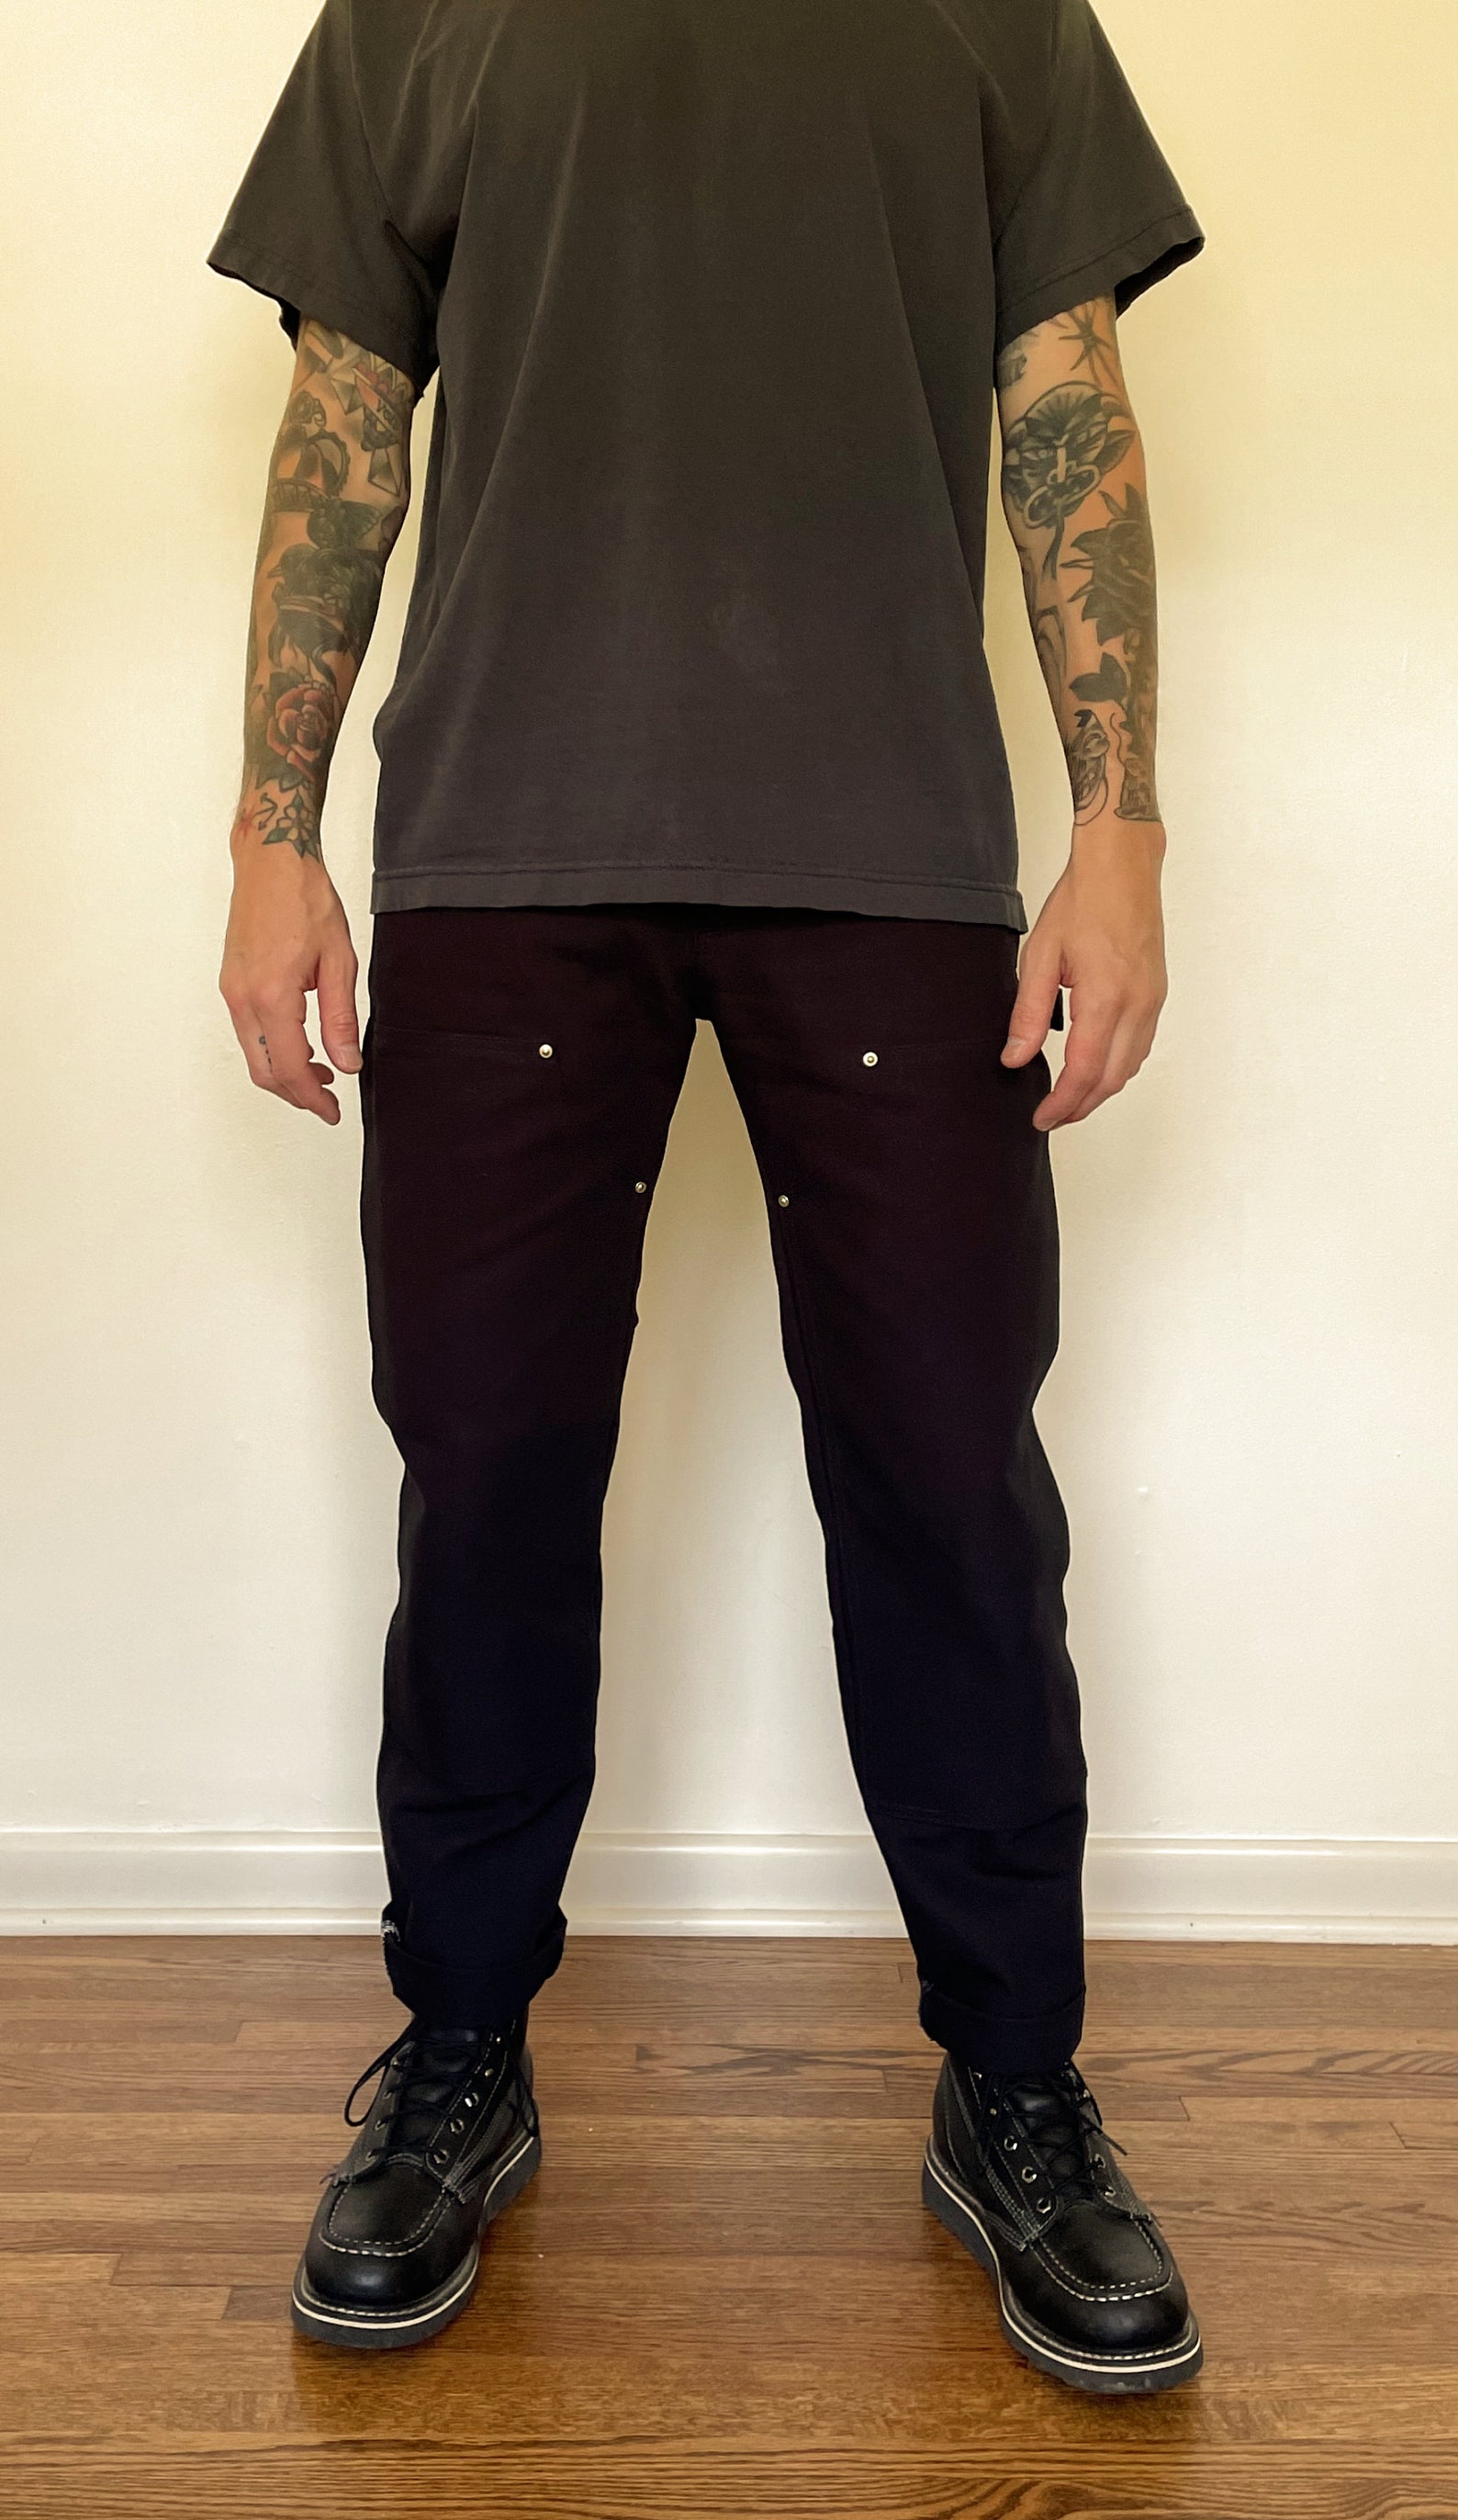 Custom Tailored Carhartt Double Front Work Pants - Etsy